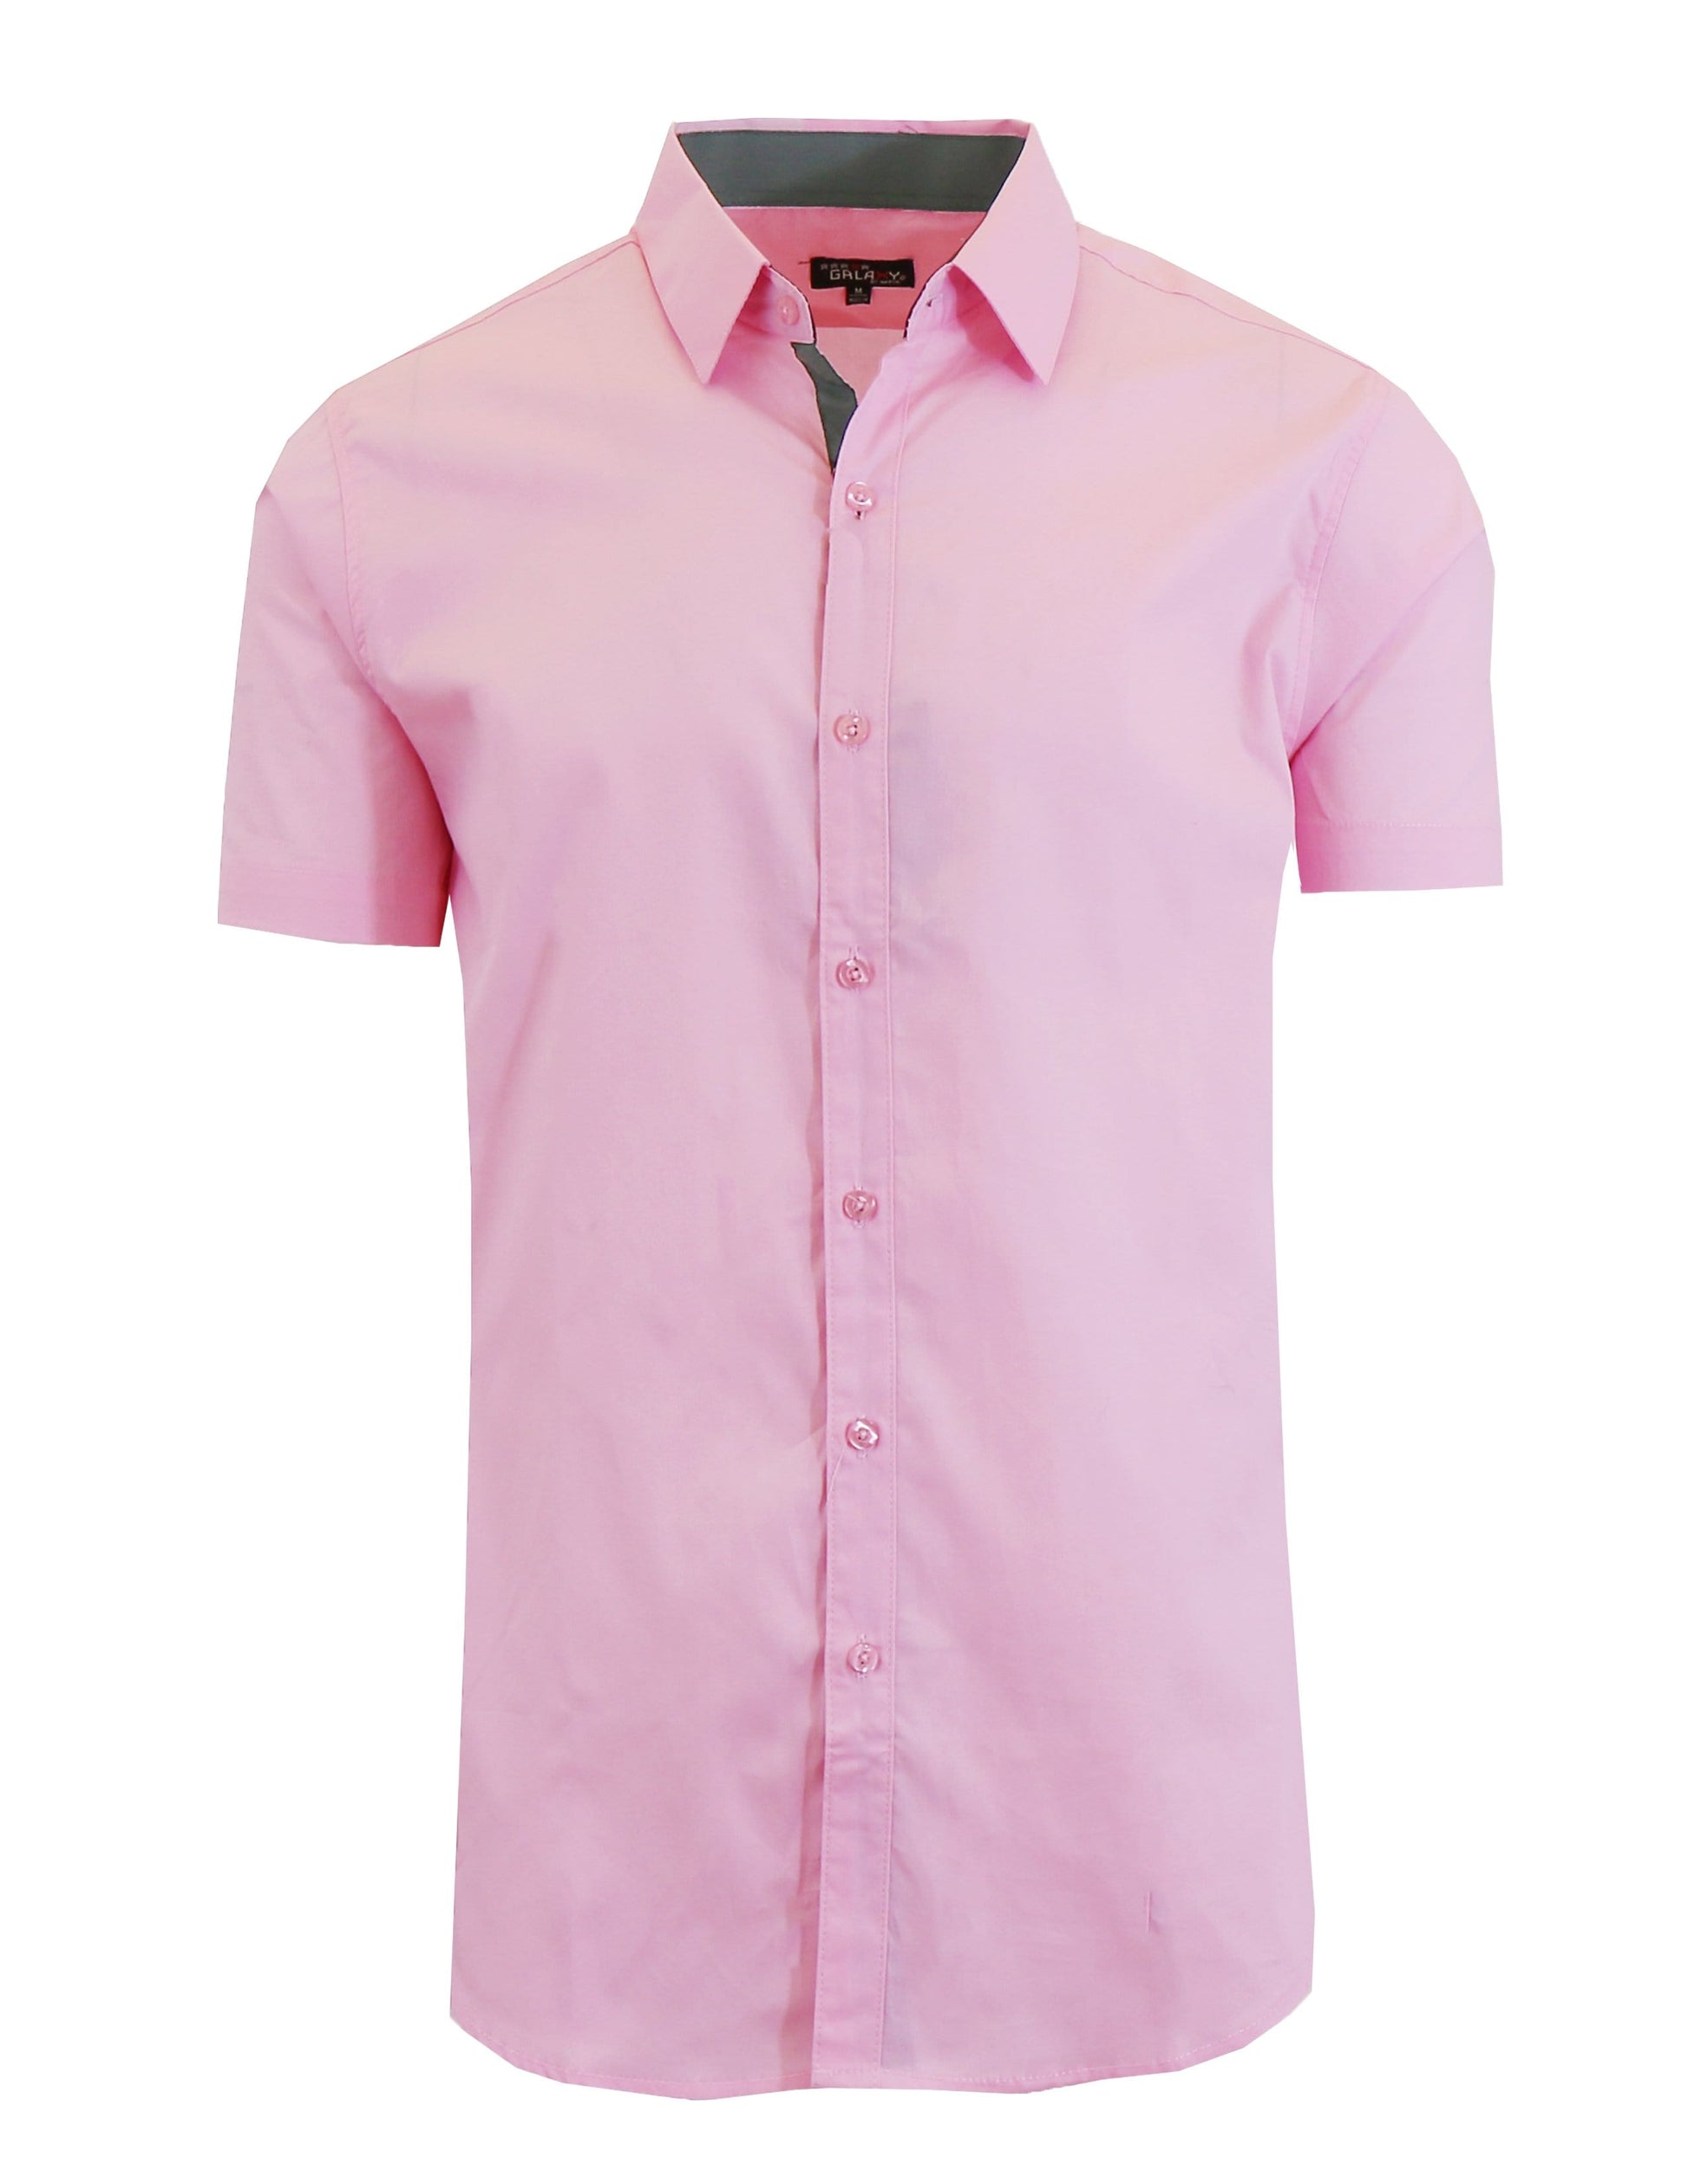 Men's Short Sleeve Slim Fit Solid Button Down Dress Shirt - GalaxybyHarvic